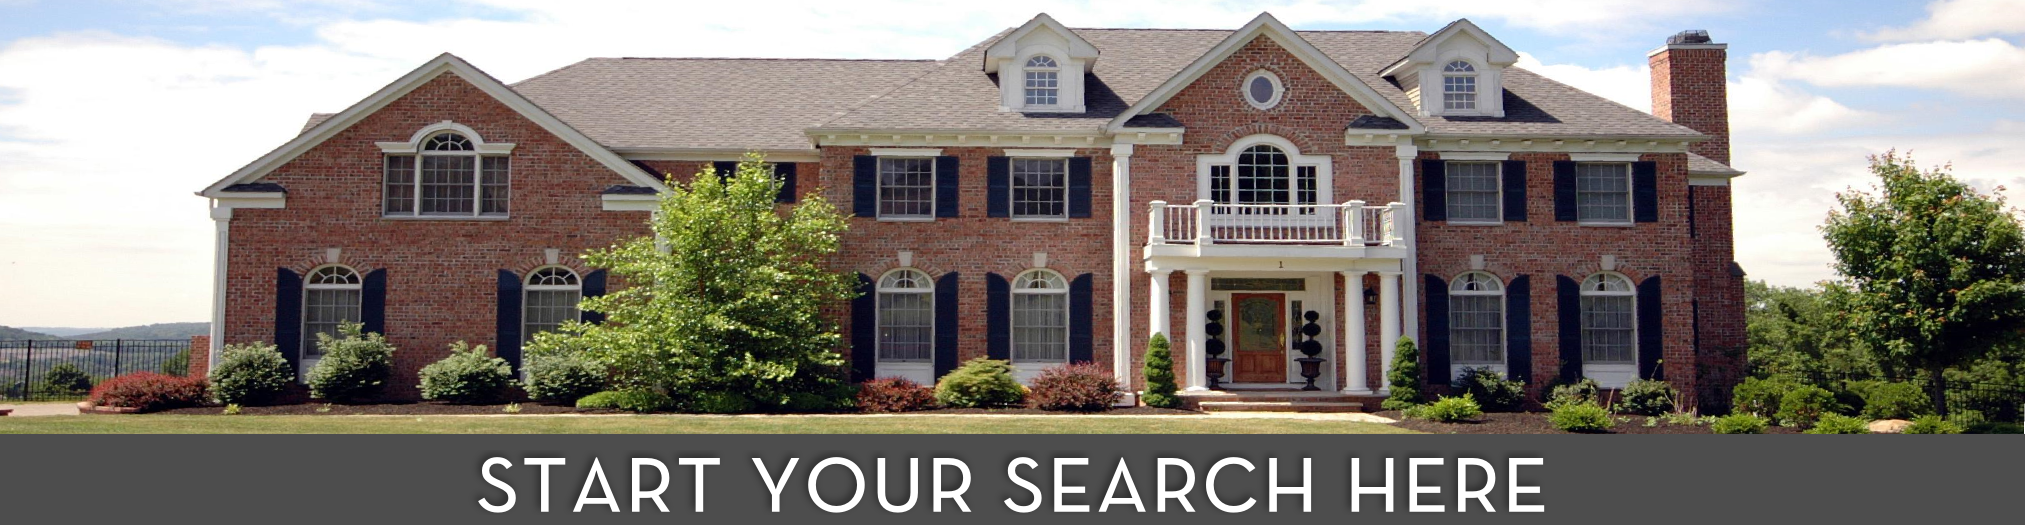 KAREN CICCONE, Keller Williams Realty - Home Search - NEW CITY  Homes